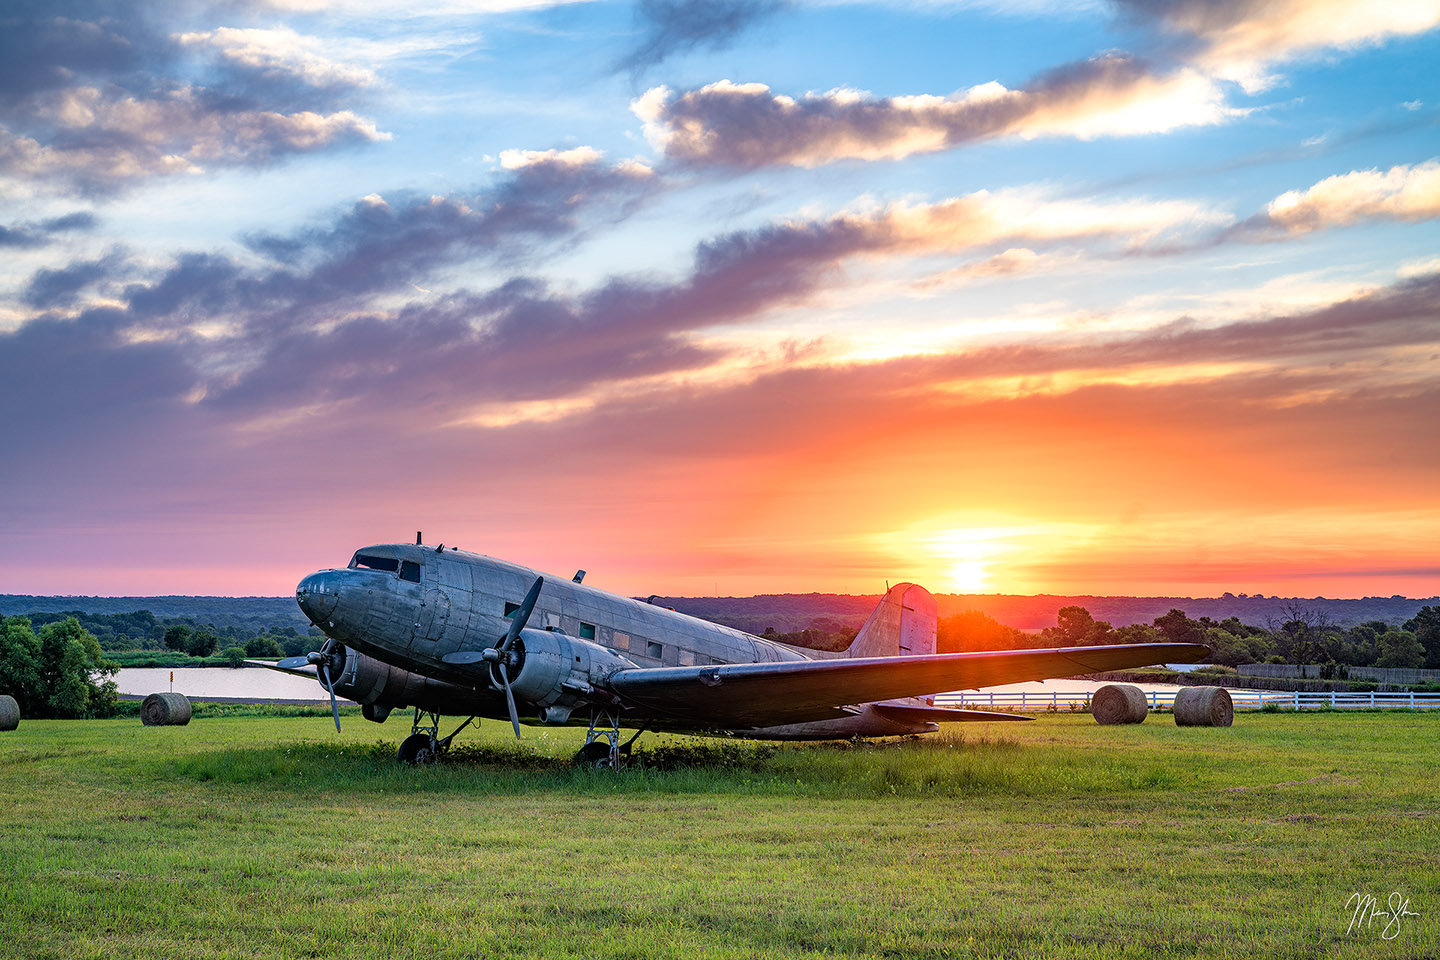 Vintage DC-3 in field in eastern Kansas. Limited Edition of 100